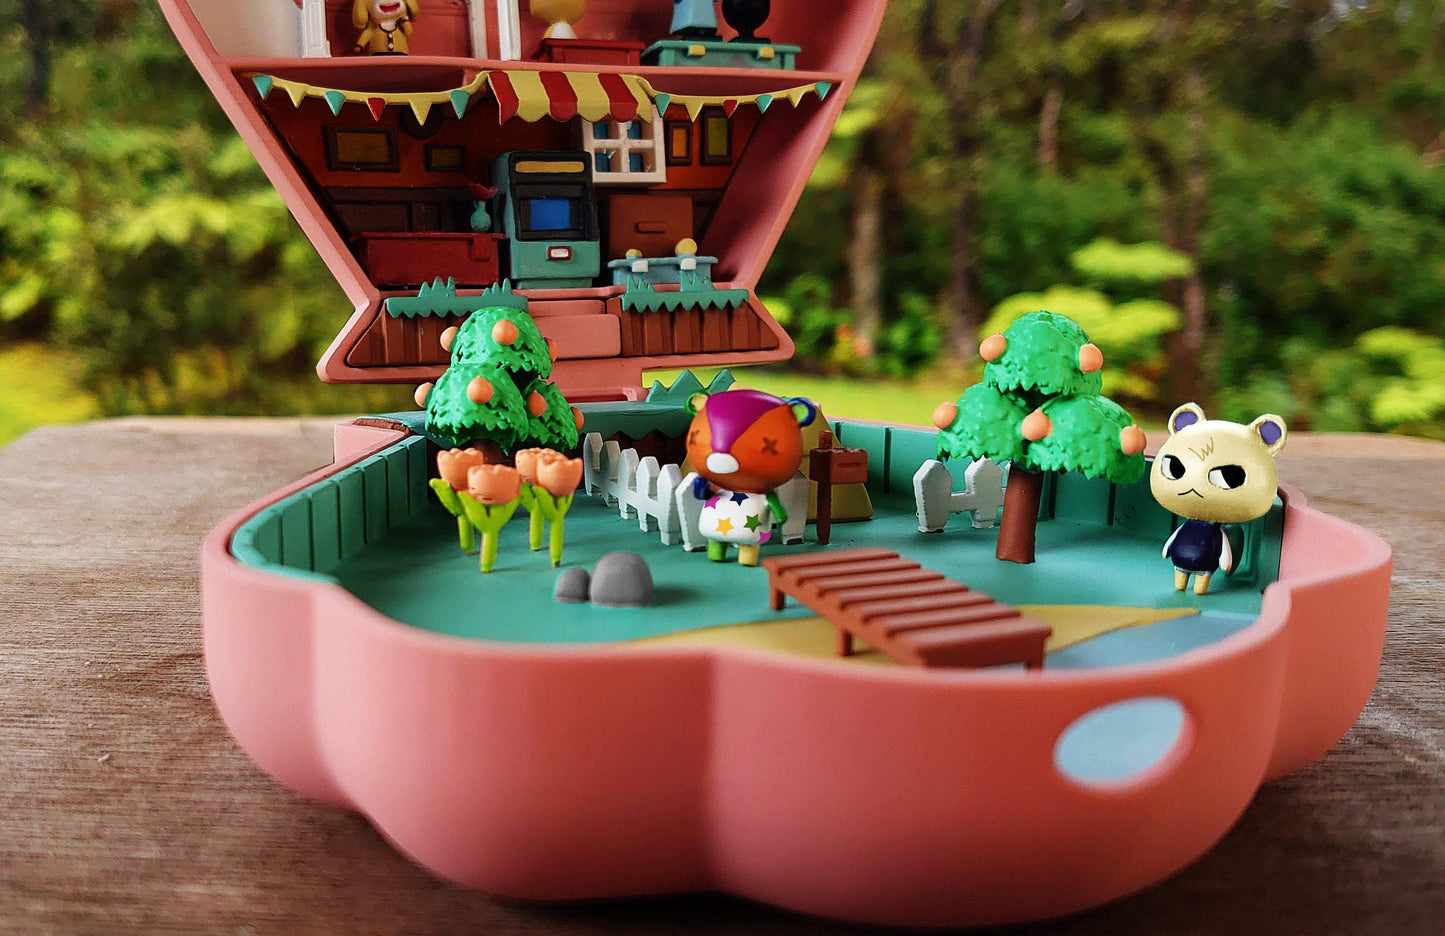 Animal Crossing Polly Pocket inspired Tiny Village Pals Clamshell